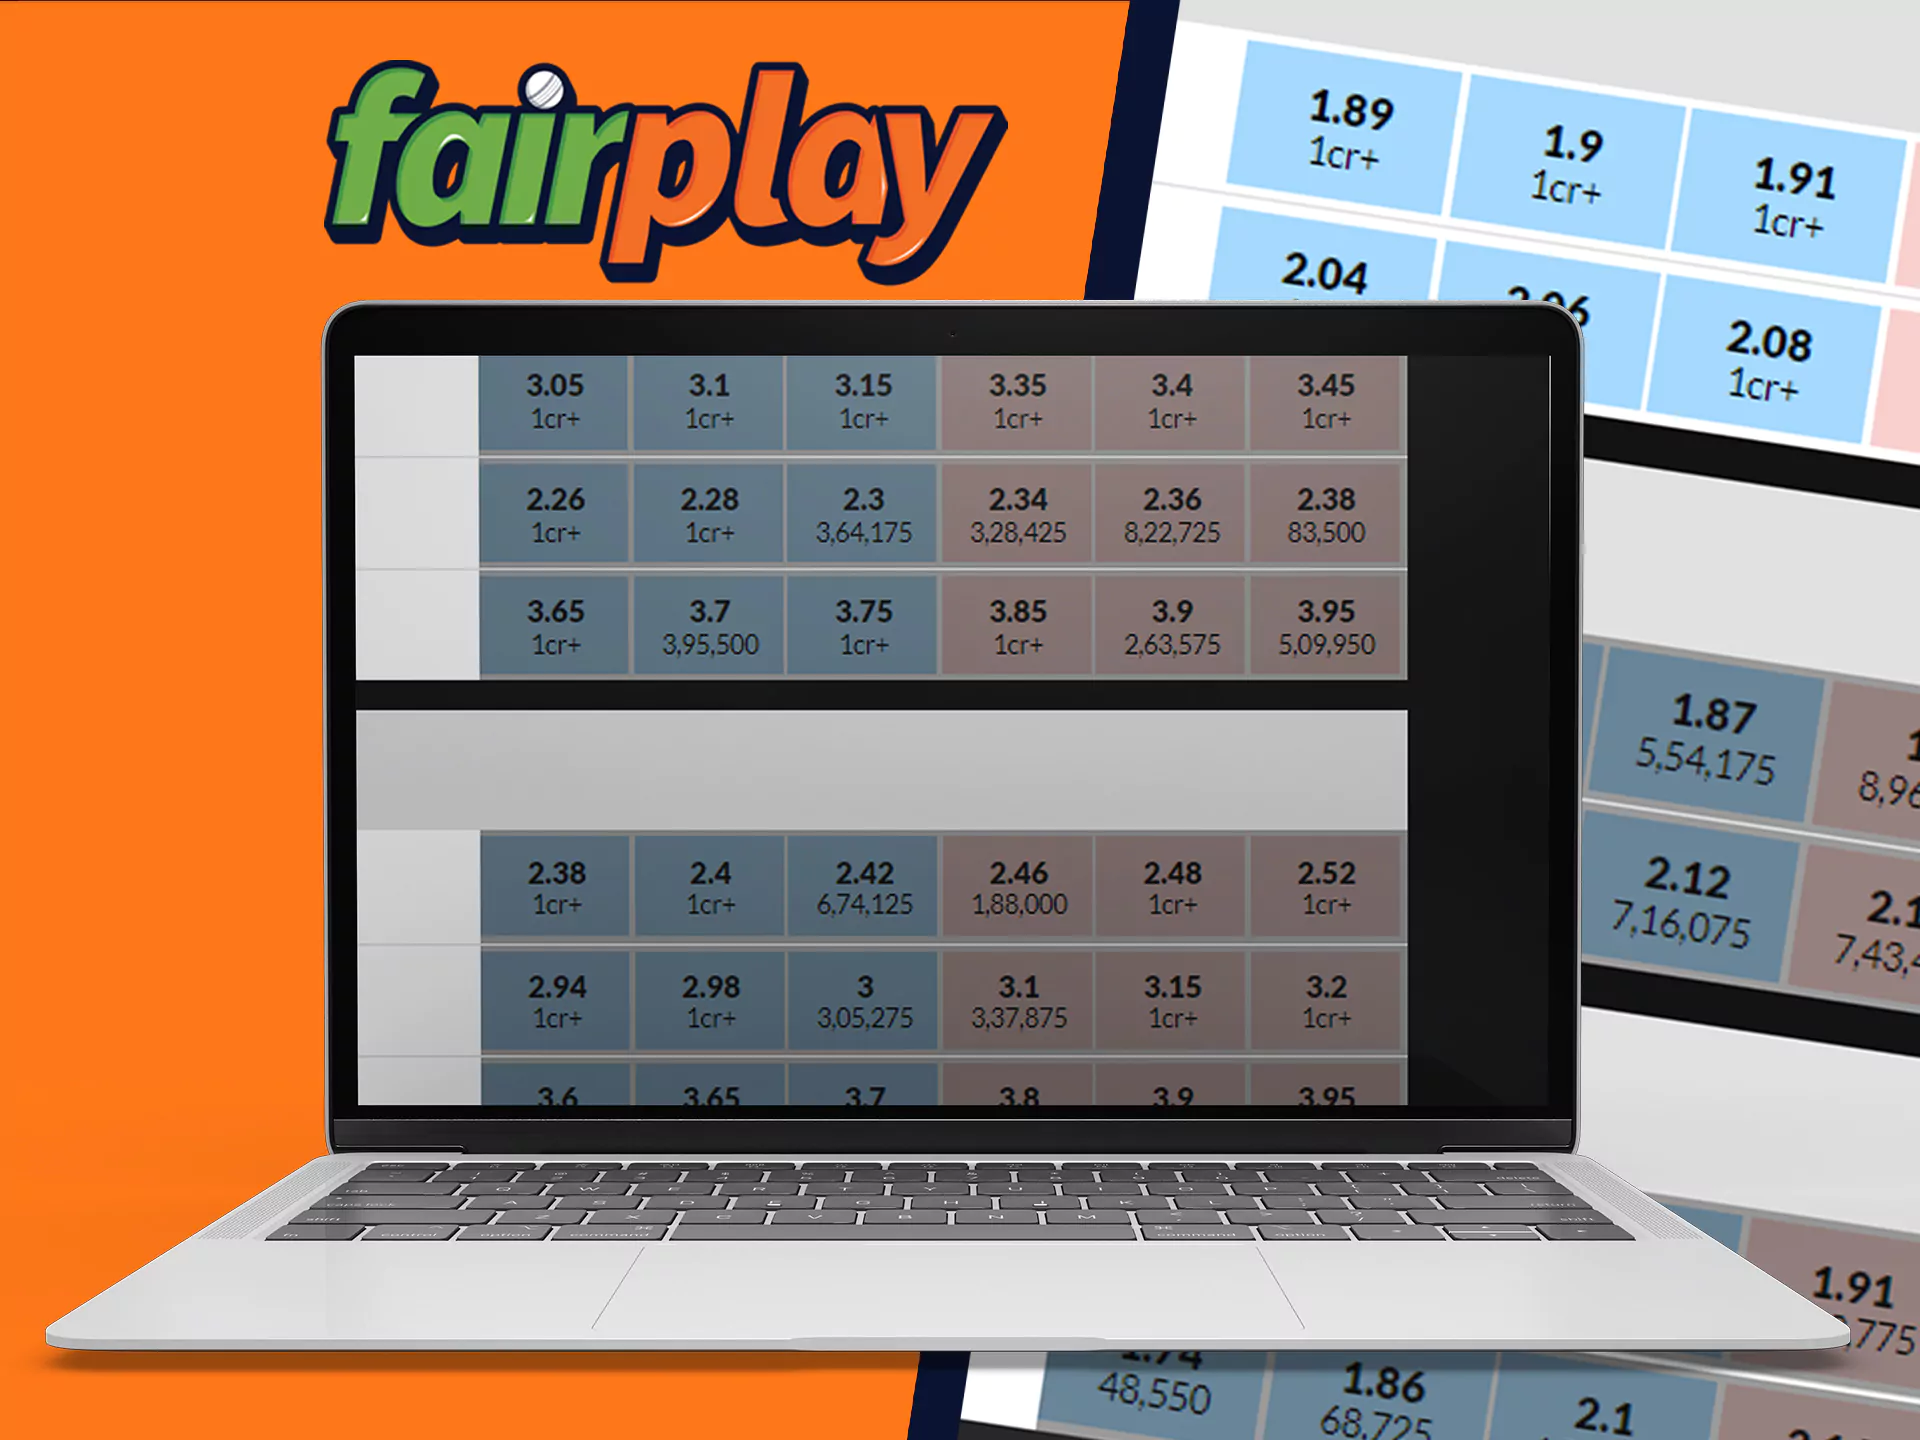 Carefully choose what to bet on at Fairplay.